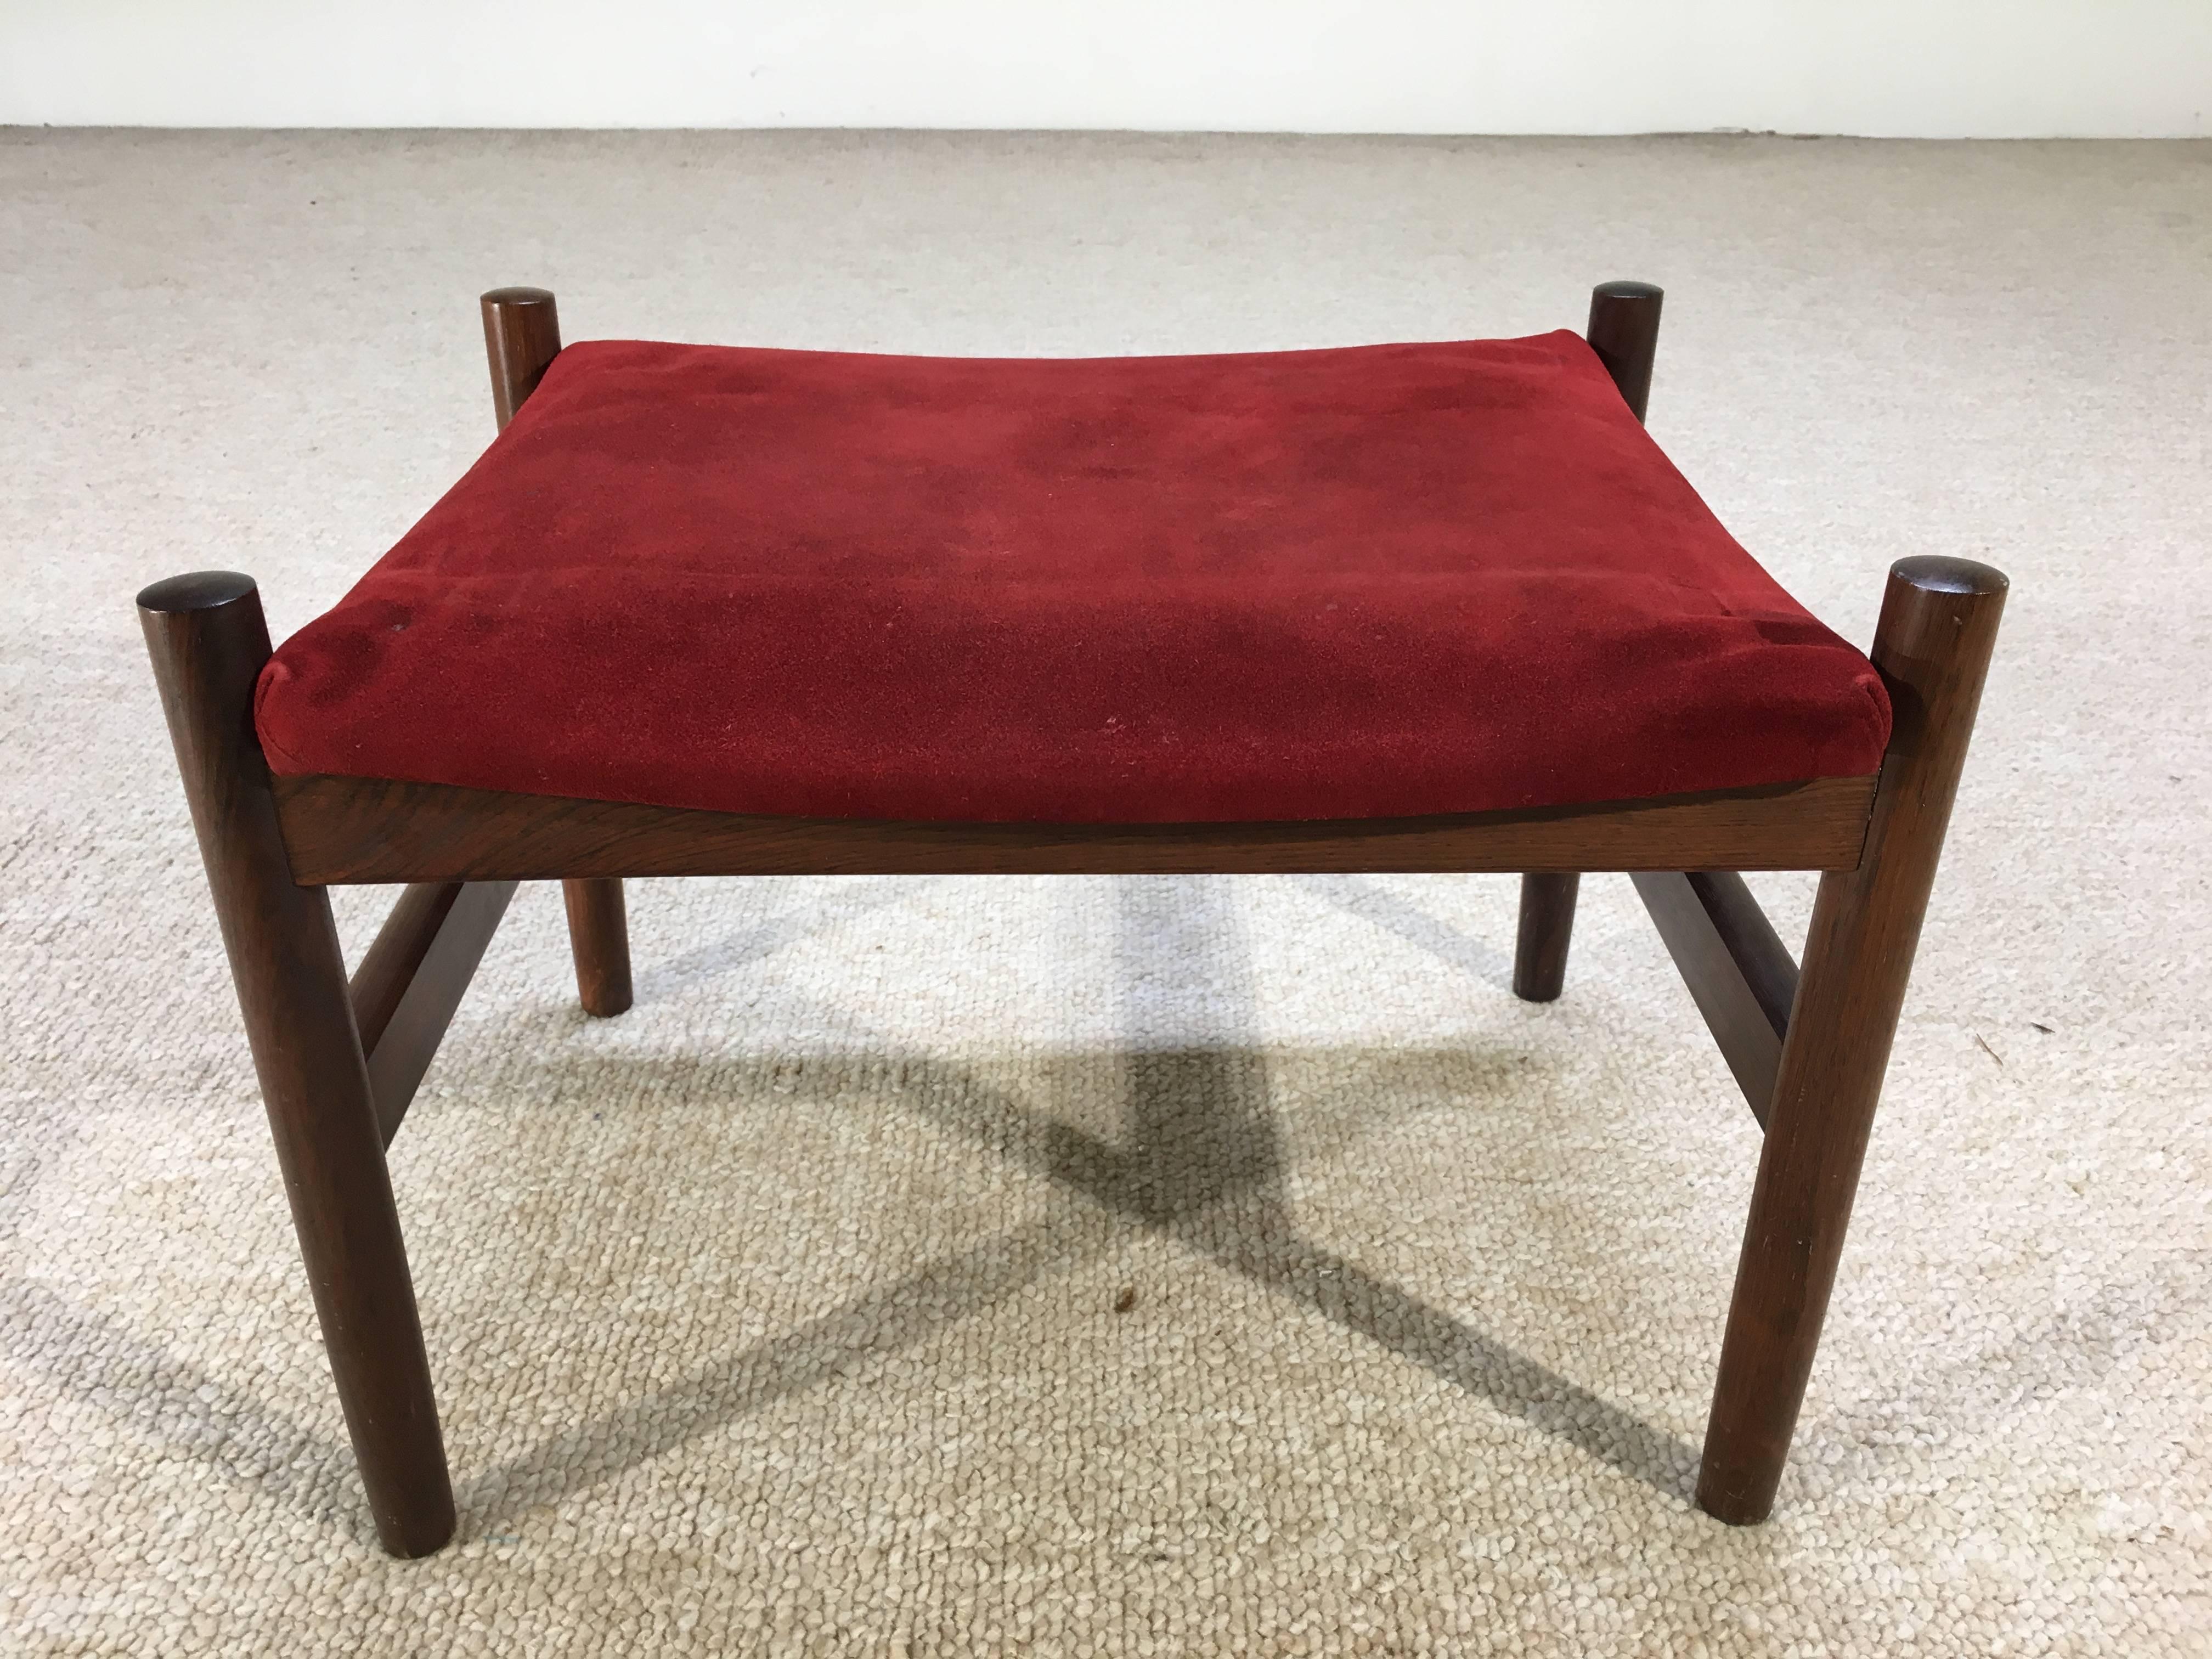 A beautiful design by Spottrup having rosewood frame and suede upholstery.
We have a second matching rosewood Spottrup ottoman listed for sale as well in black suede.